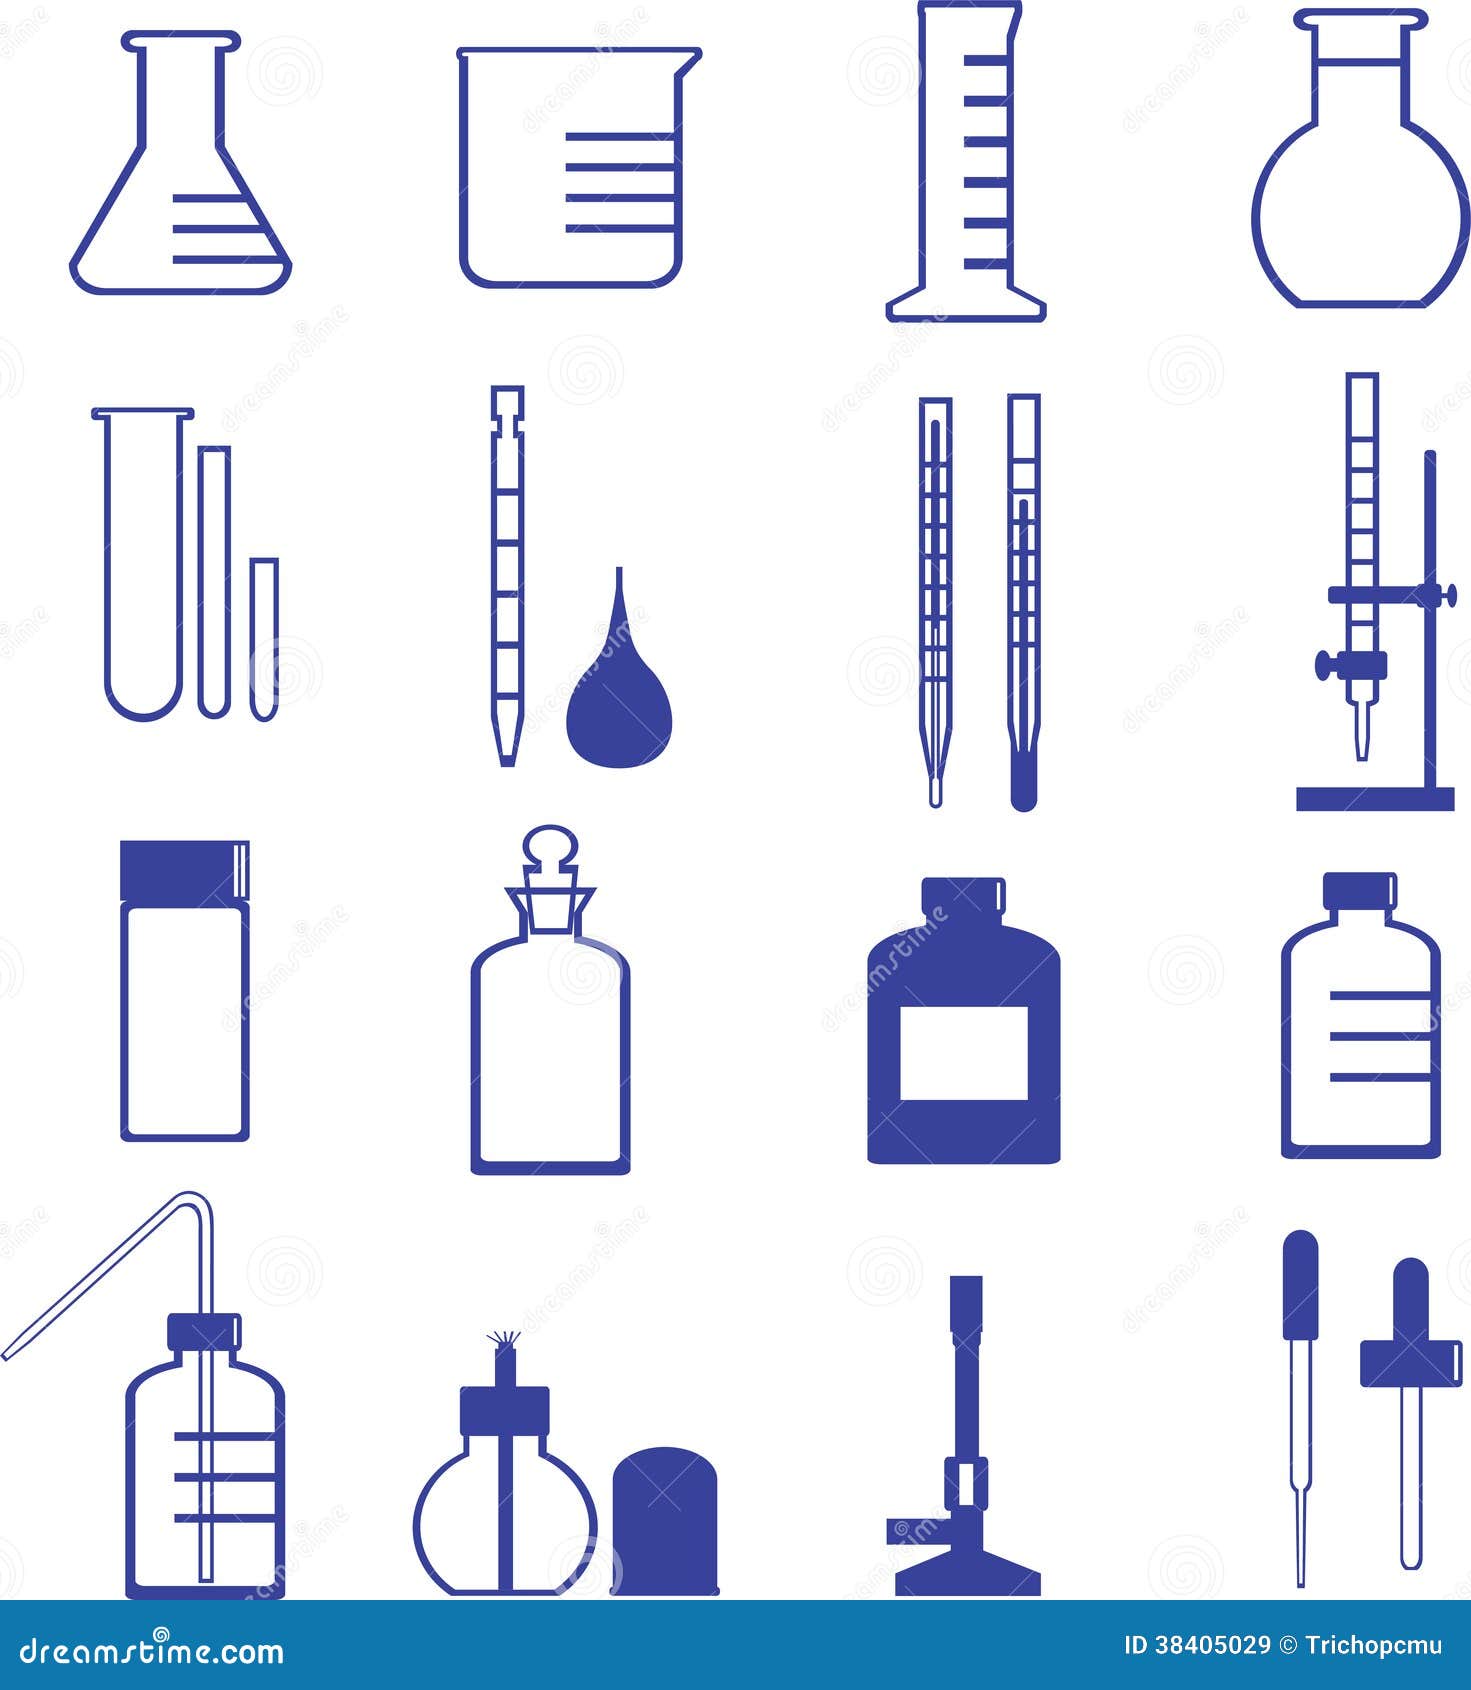 Chemistry Glassware And Tools Royalty Free Stock Images - Image: 38405029